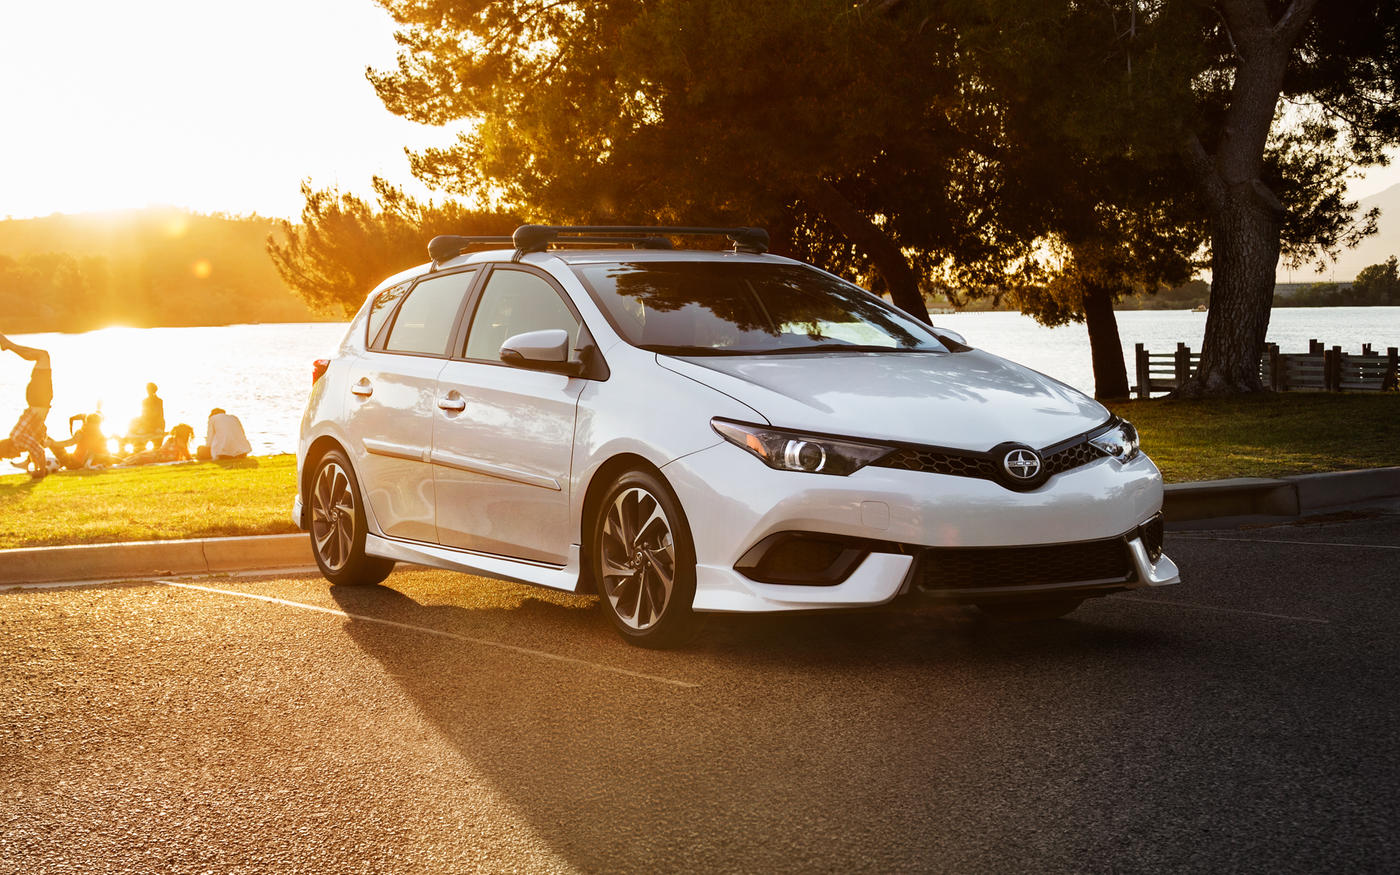 TEST DRIVE and REVIEW: 2016 Scion iM is Value Engineering at its Peak